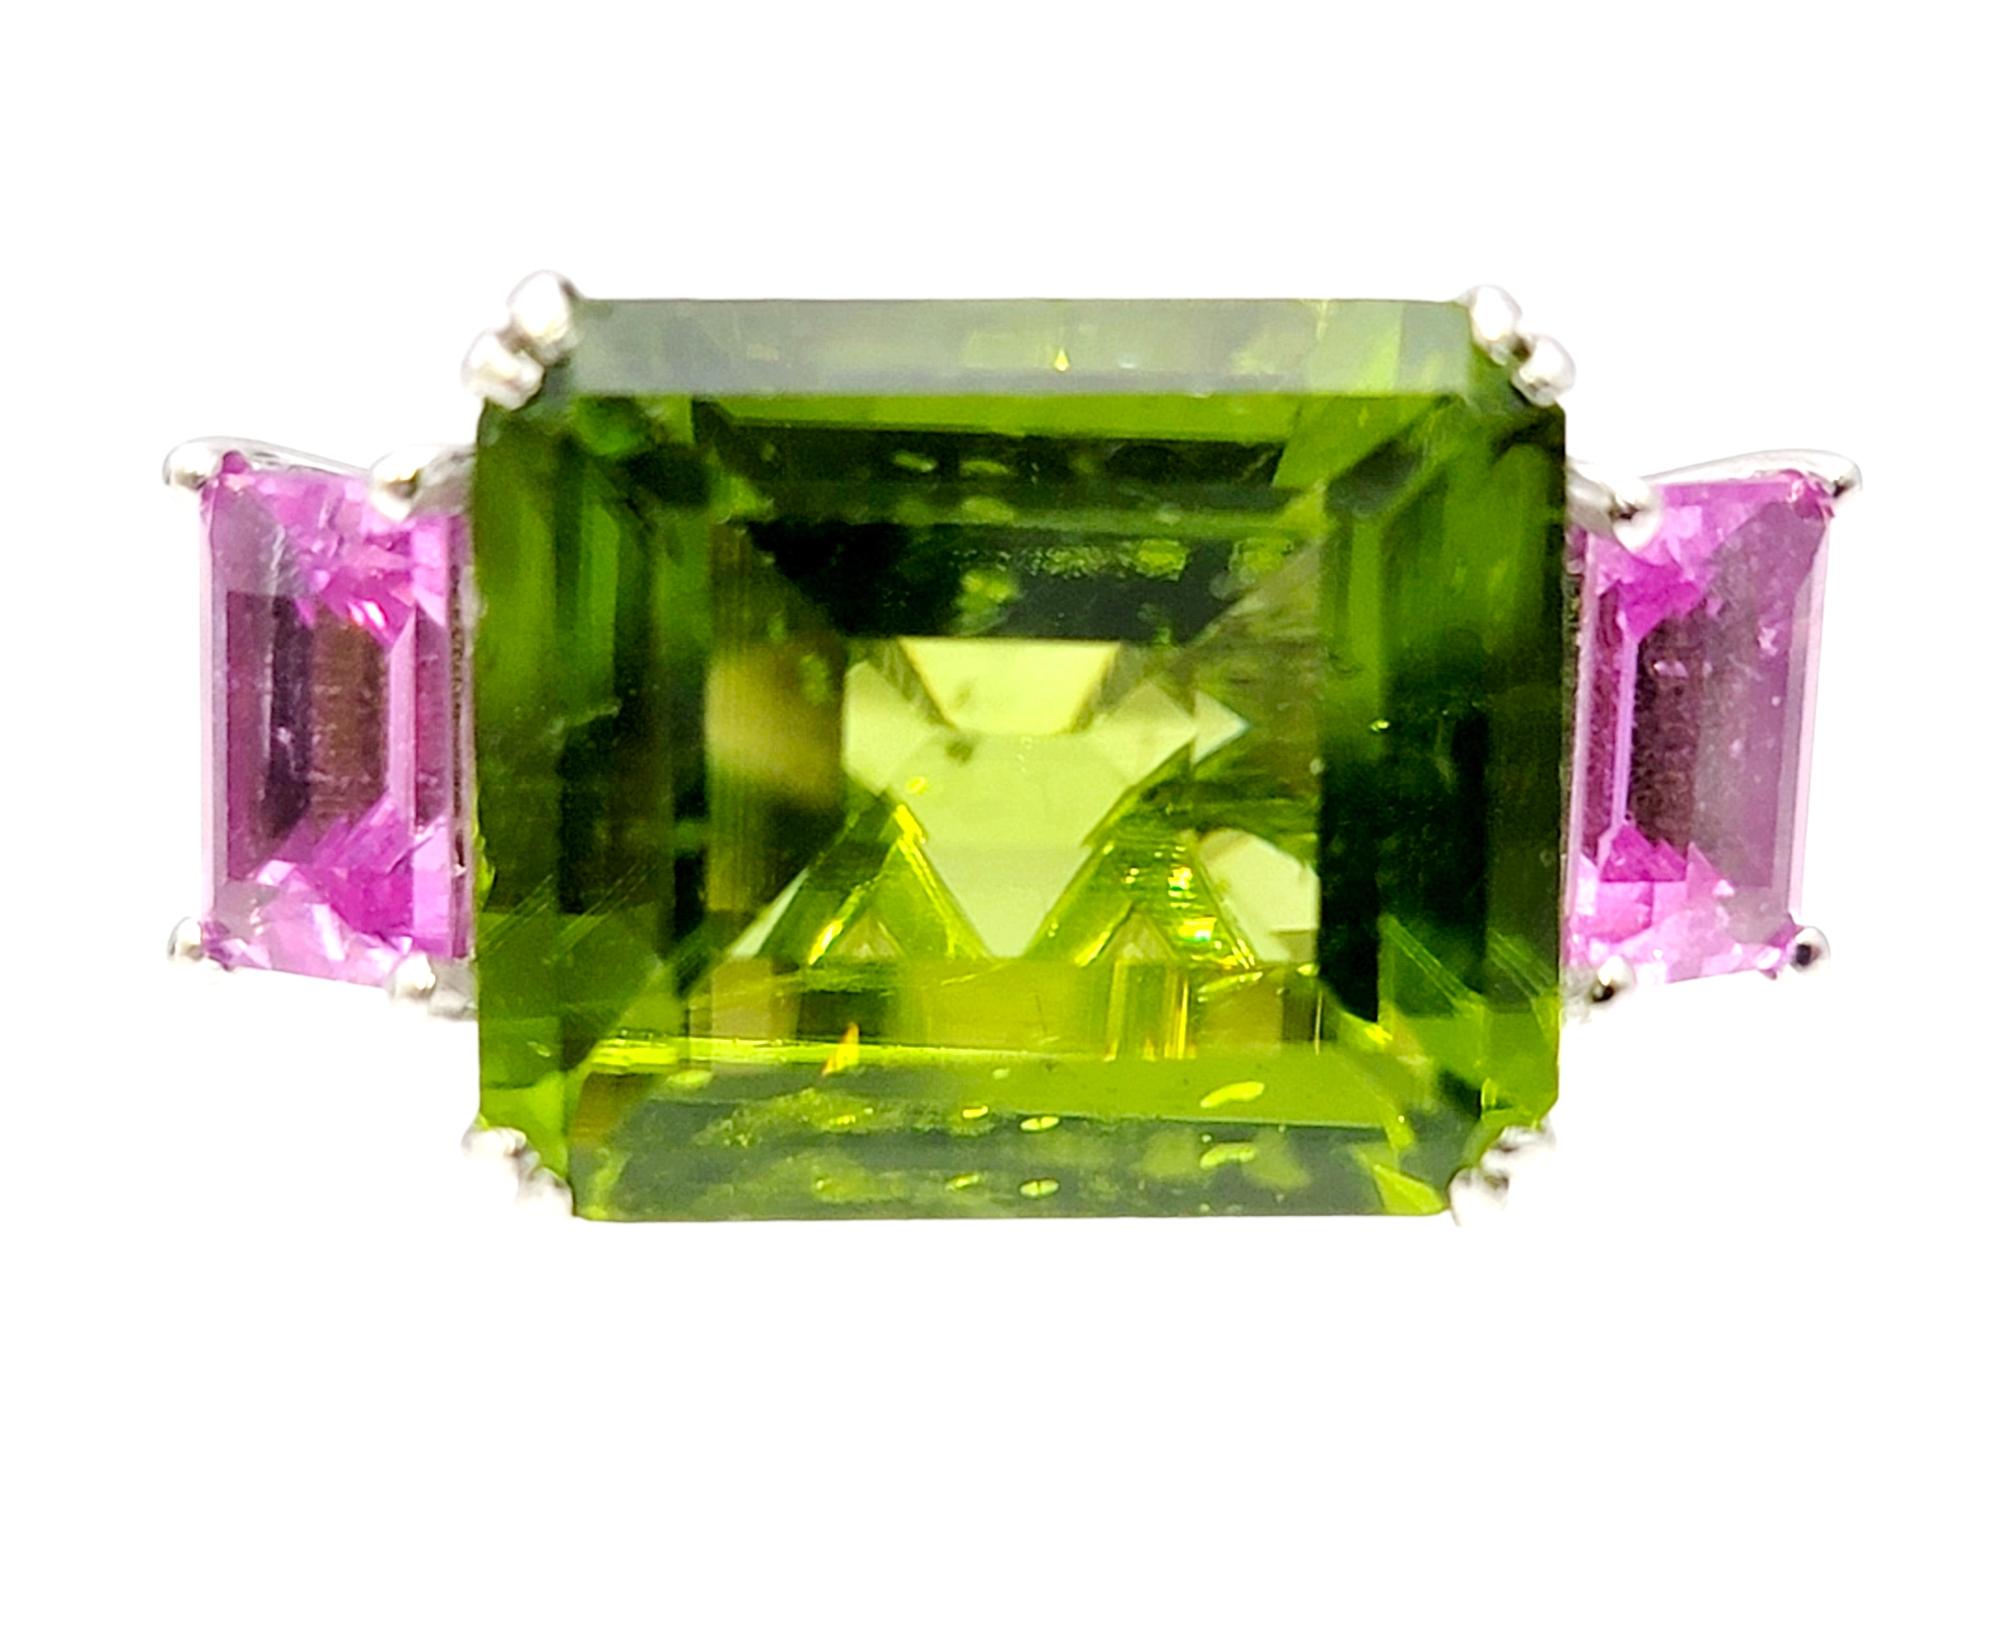 Ring size: 7.5

Bright, bold and beautiful peridot and pink sapphire 3 stone cocktail ring with diamond accents. This ultra contemporary piece is certainly eye-catching with its impressive size and vibrant color and absolutely pops on the finger.